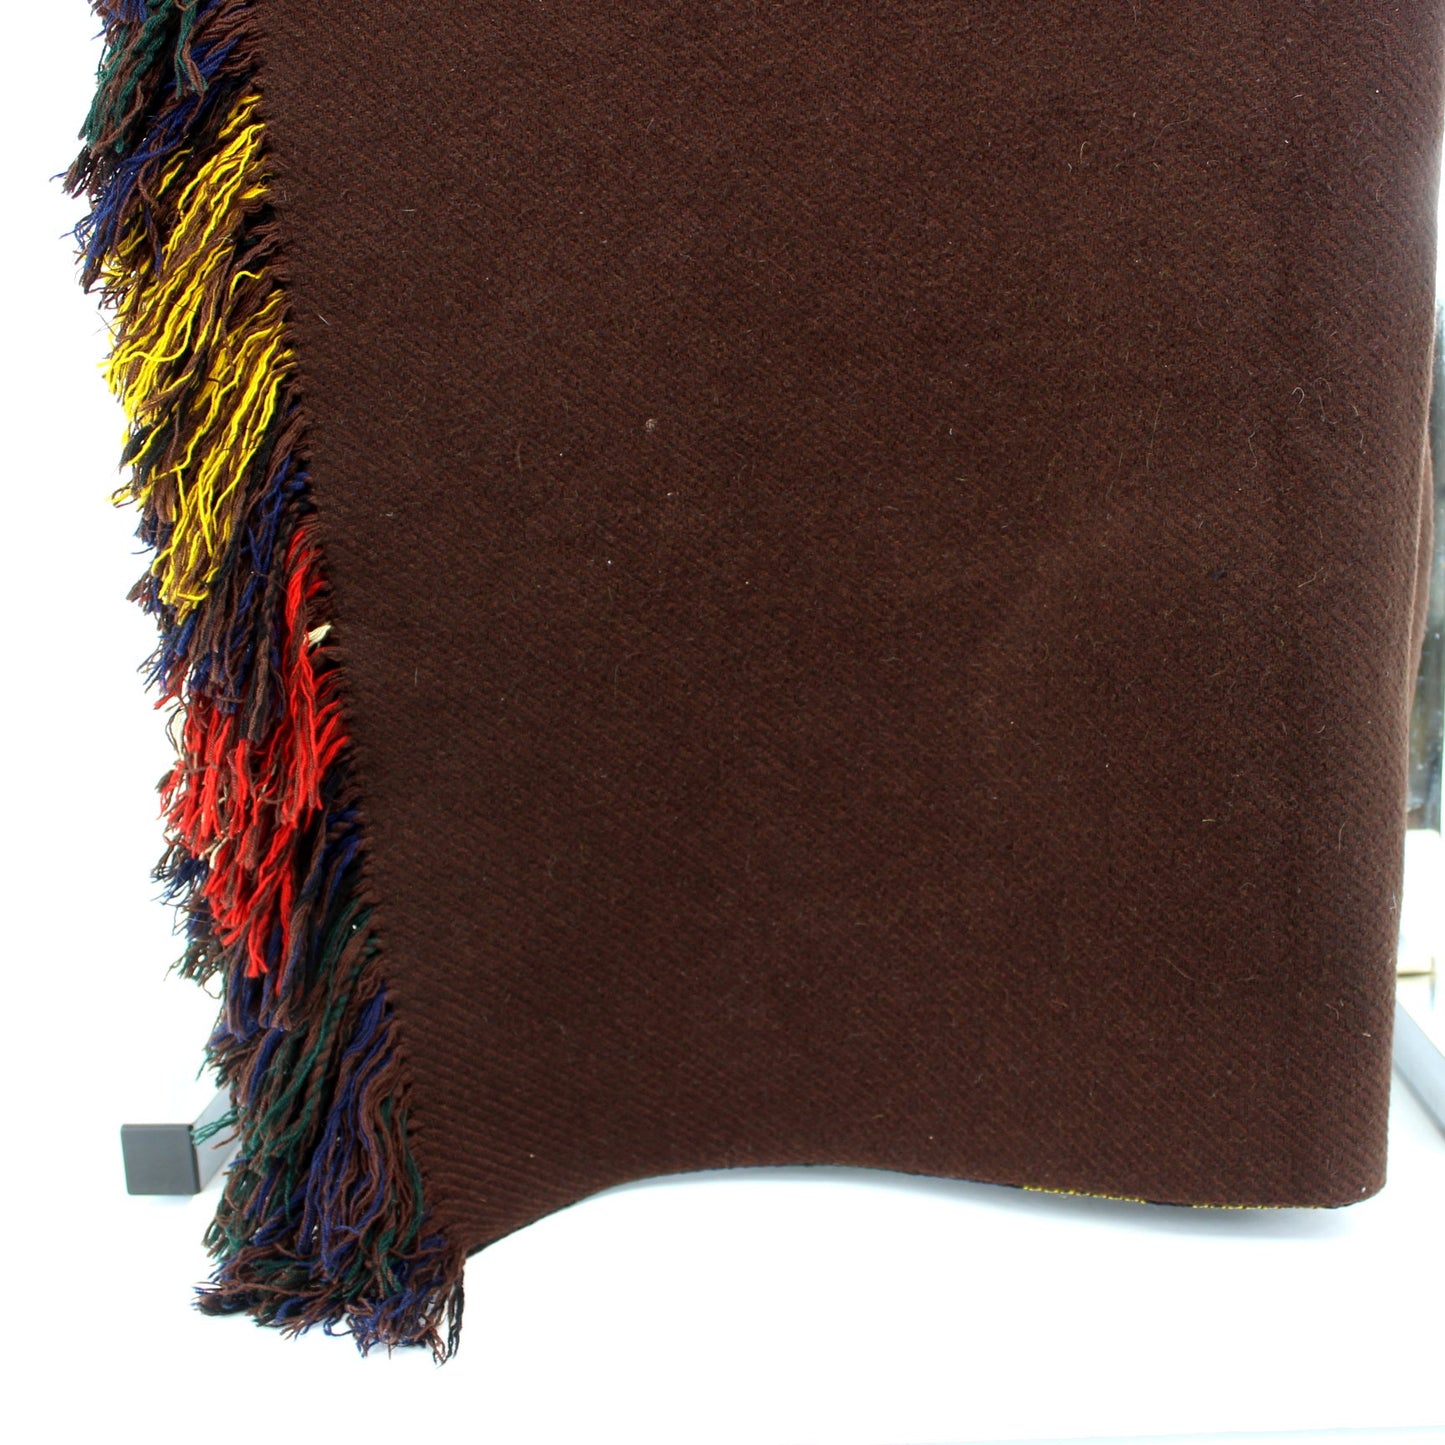 Wool Blanket Throw Reversible Plaid to Solid Brown Double Fabric close view brown solid side of throw